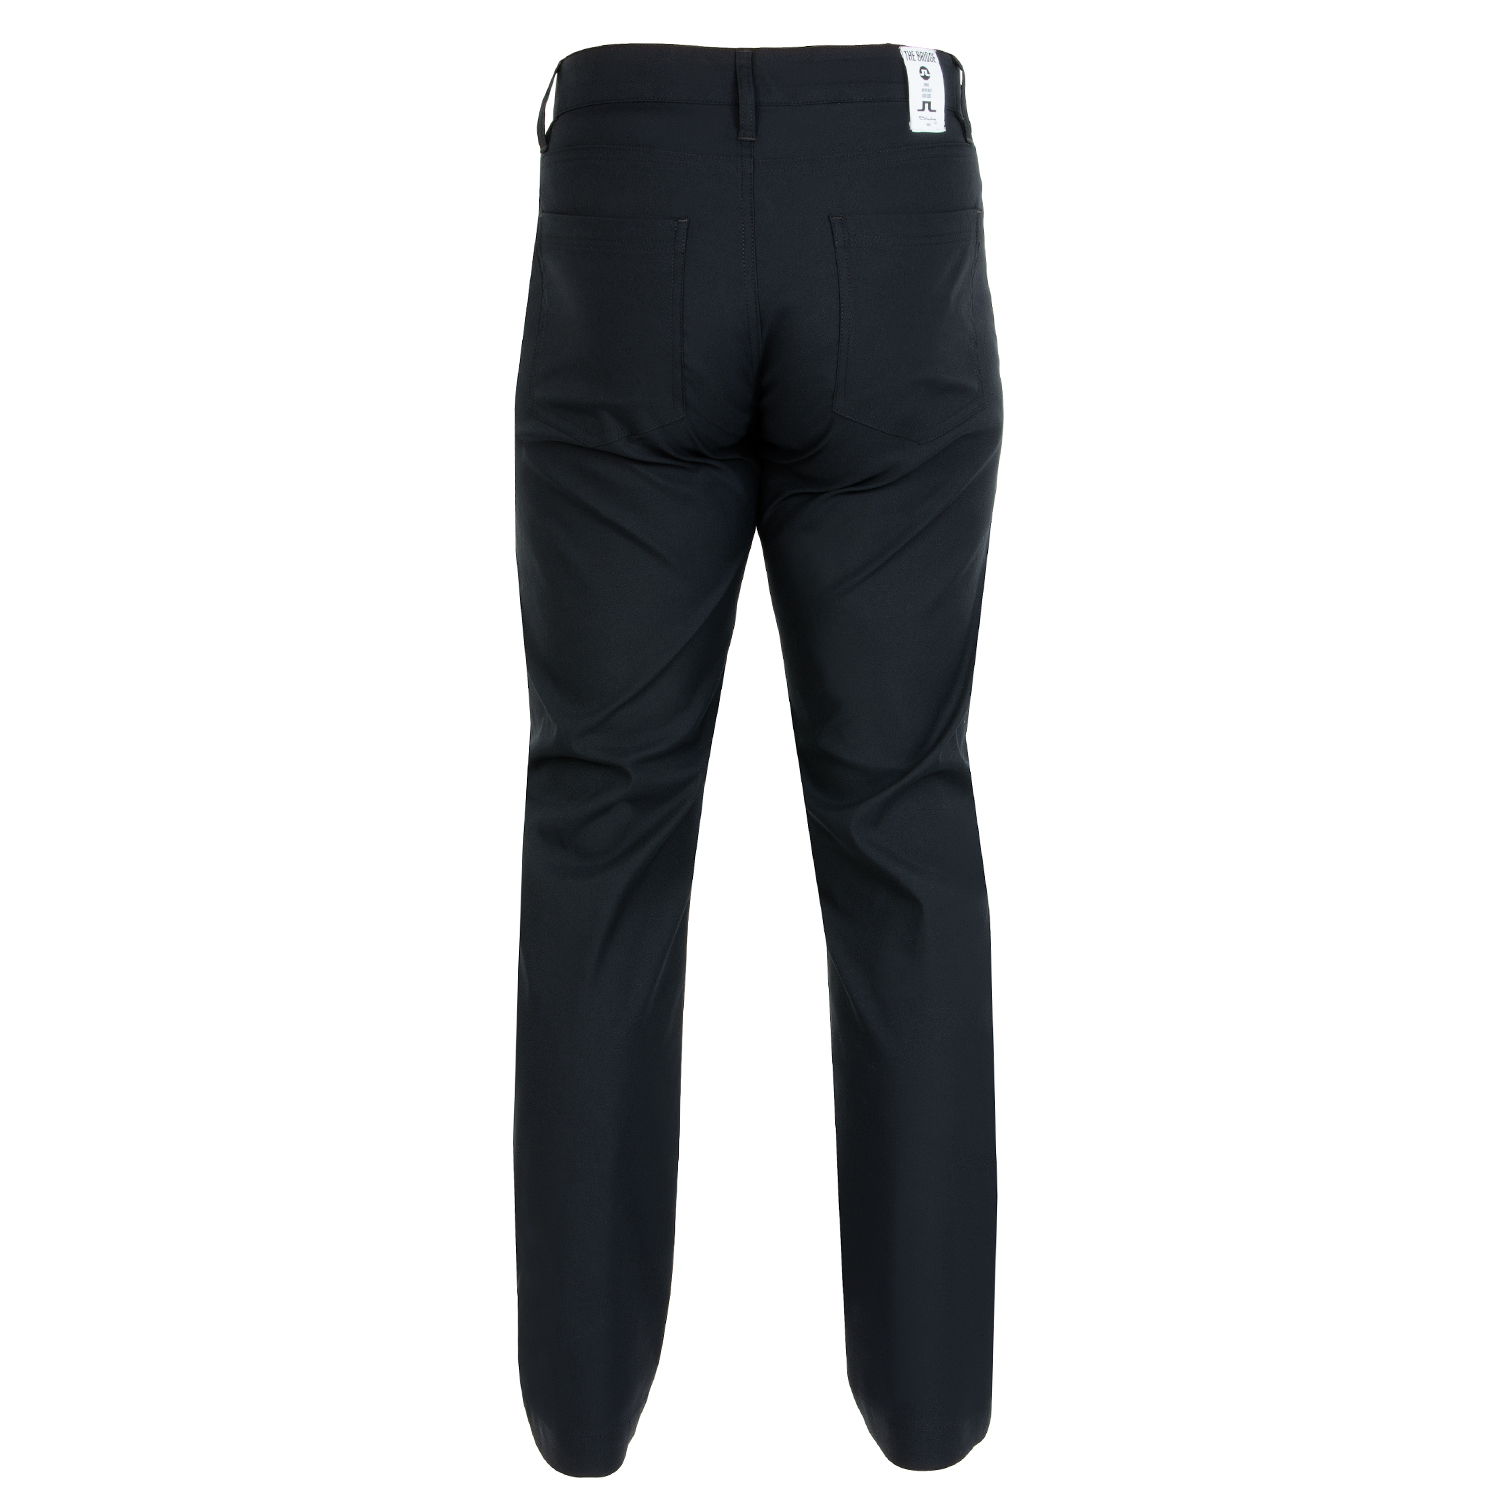 J Lindeberg Iconic Schoeller Dry Trousers Black | Scottsdale Golf